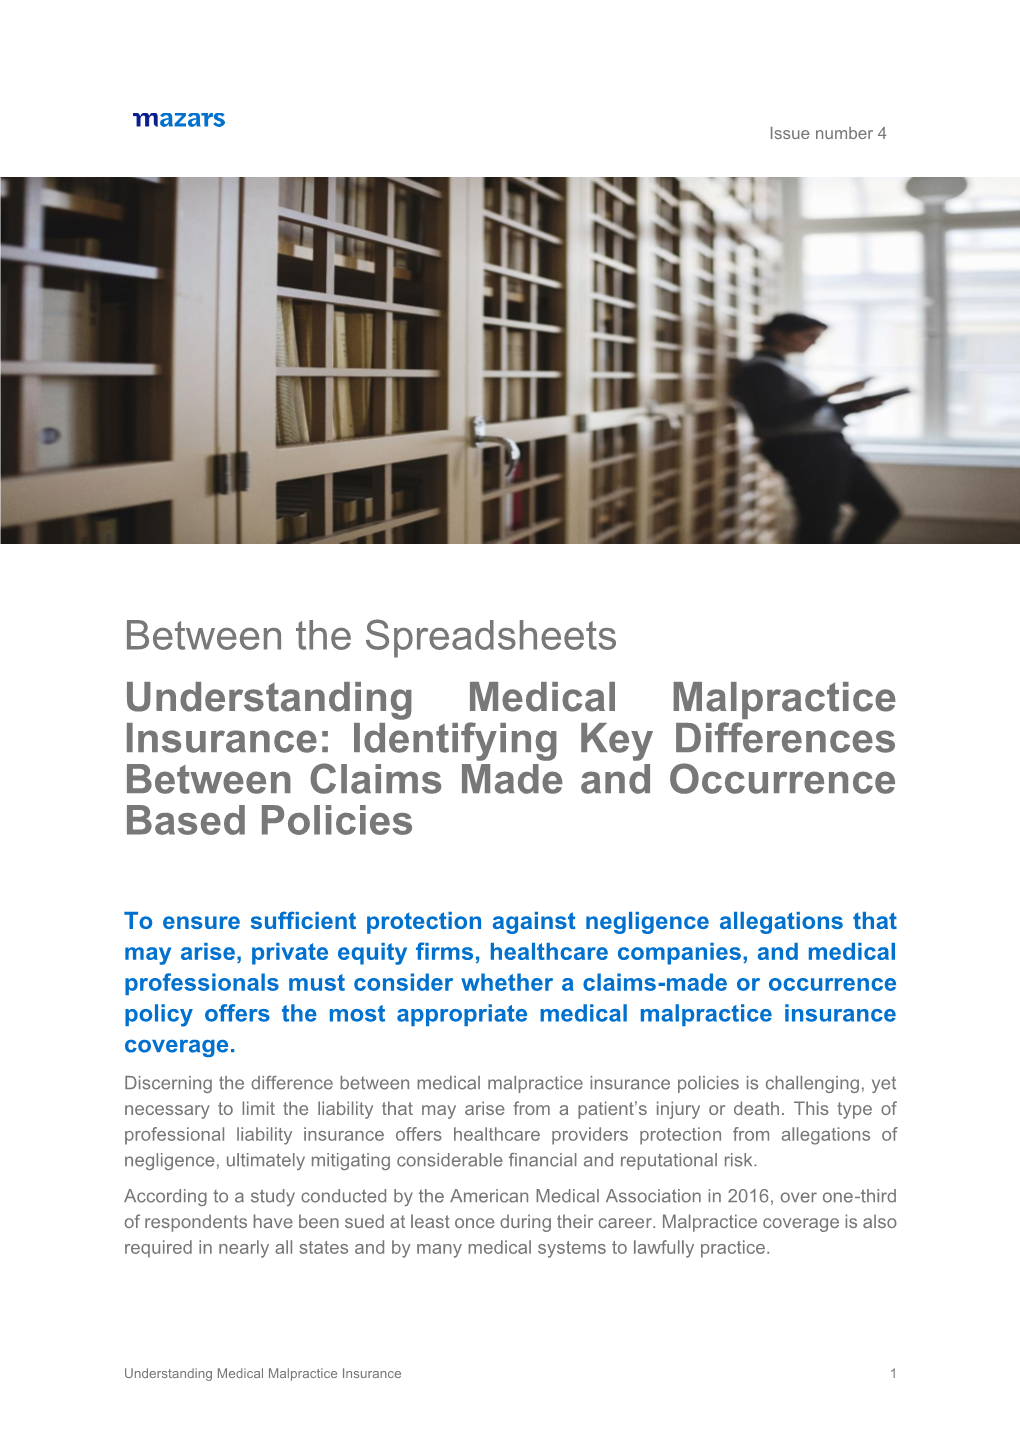 Between the Spreadsheets Understanding Medical Malpractice Insurance: Identifying Key Differences Between Claims Made and Occurrence Based Policies